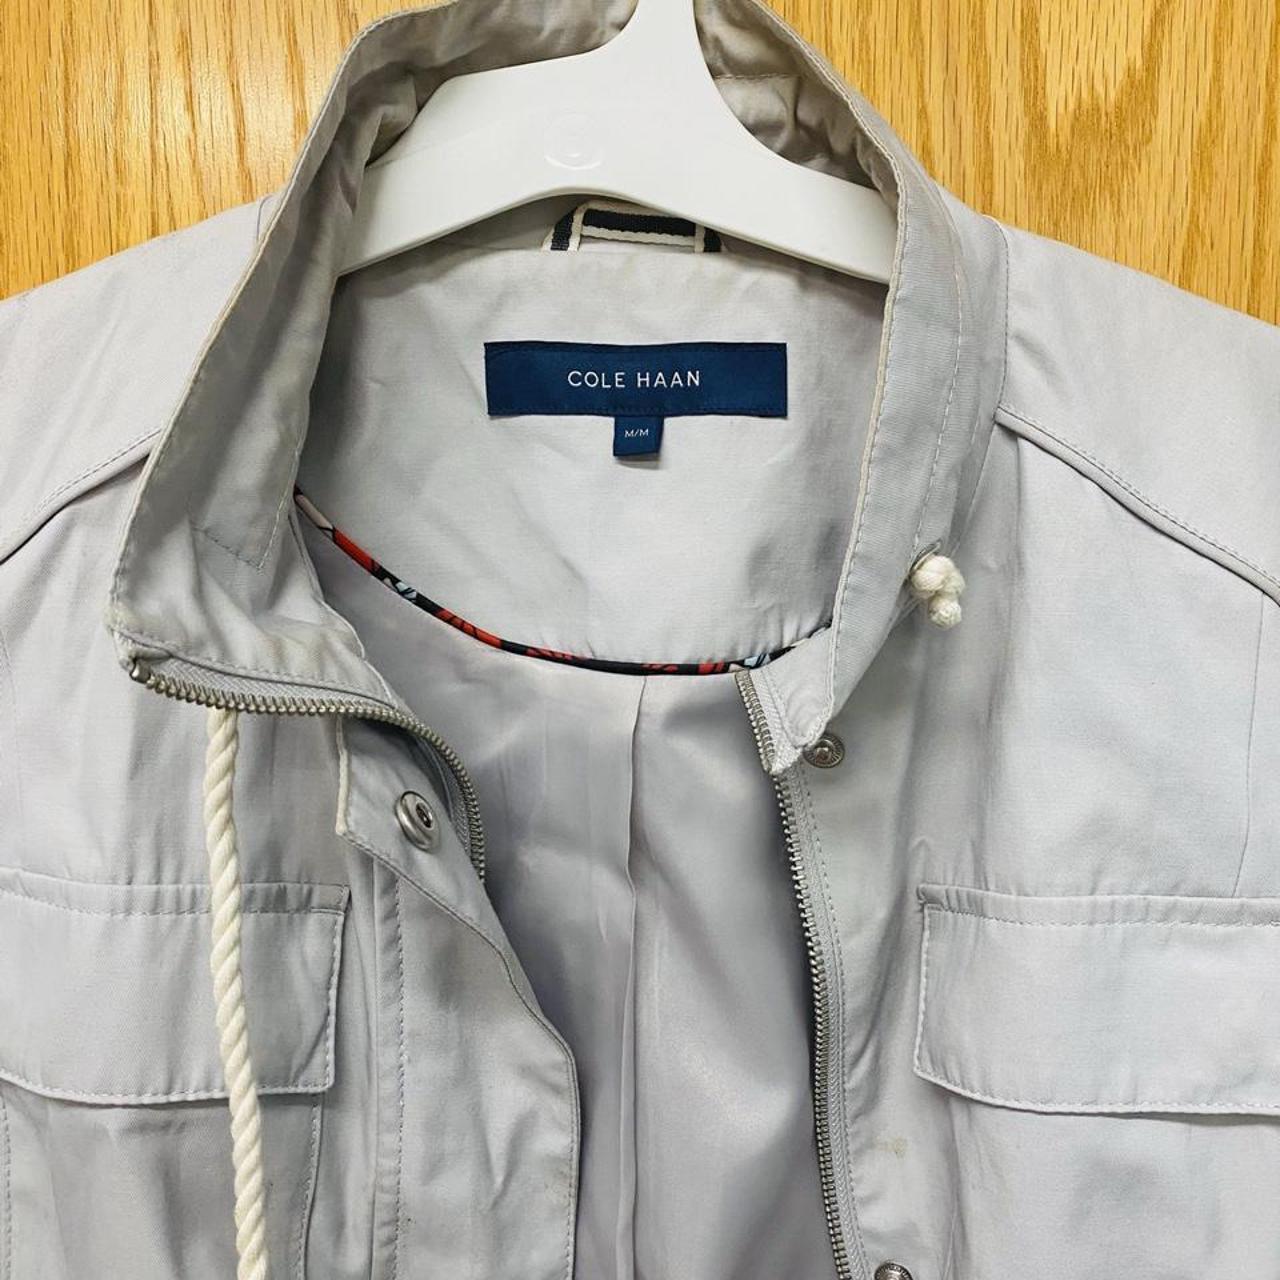 Product Image 3 - Cole haan jacket